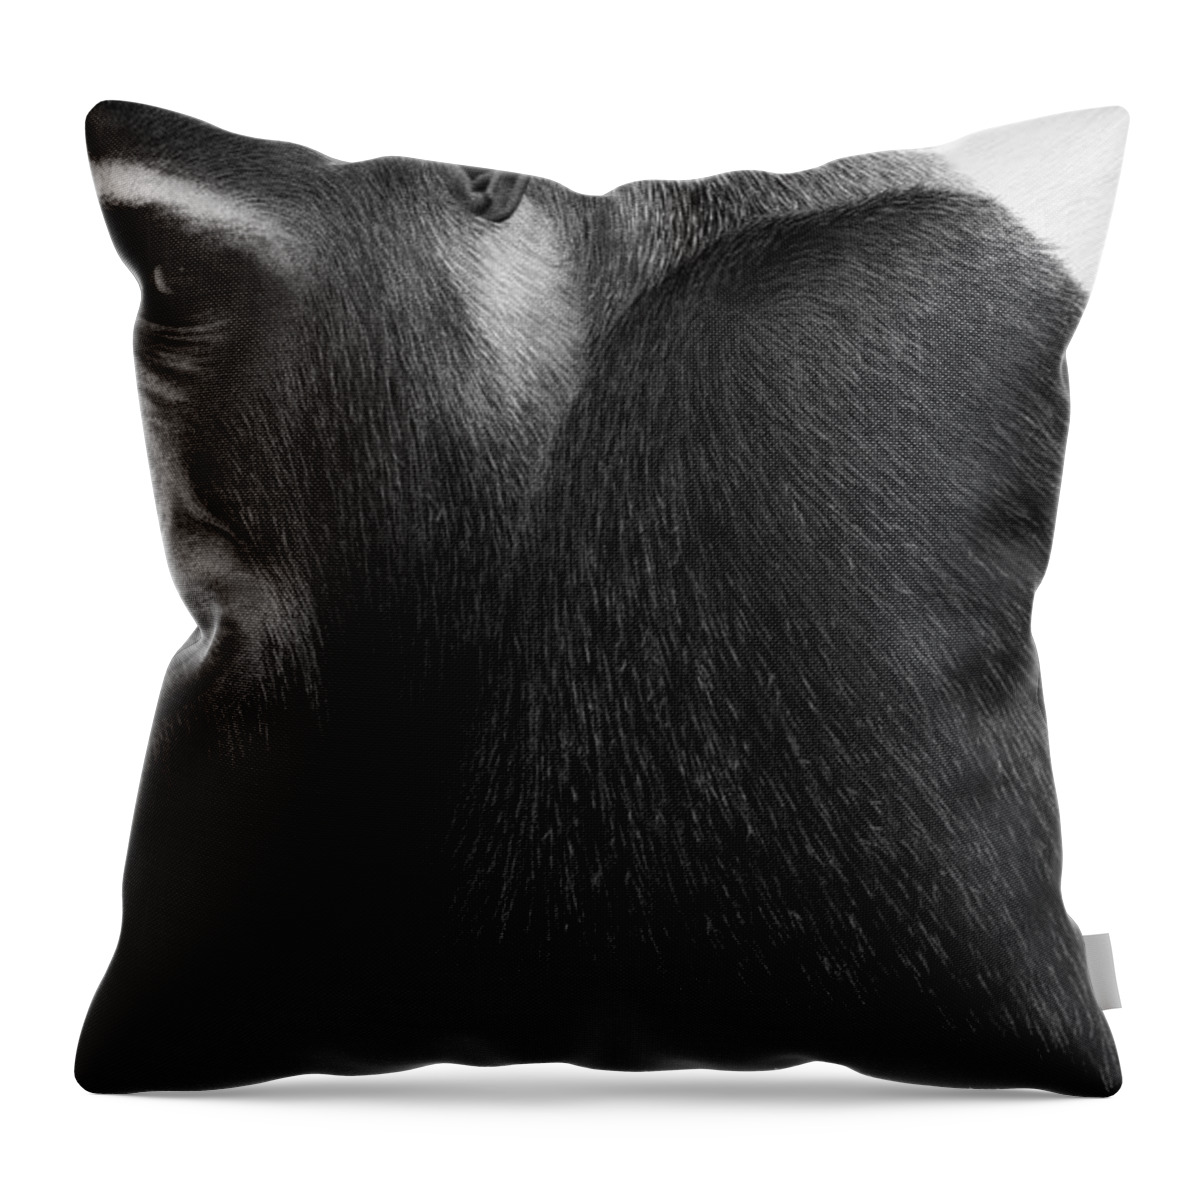 Gorilla Throw Pillow featuring the drawing Kong by Stirring Images